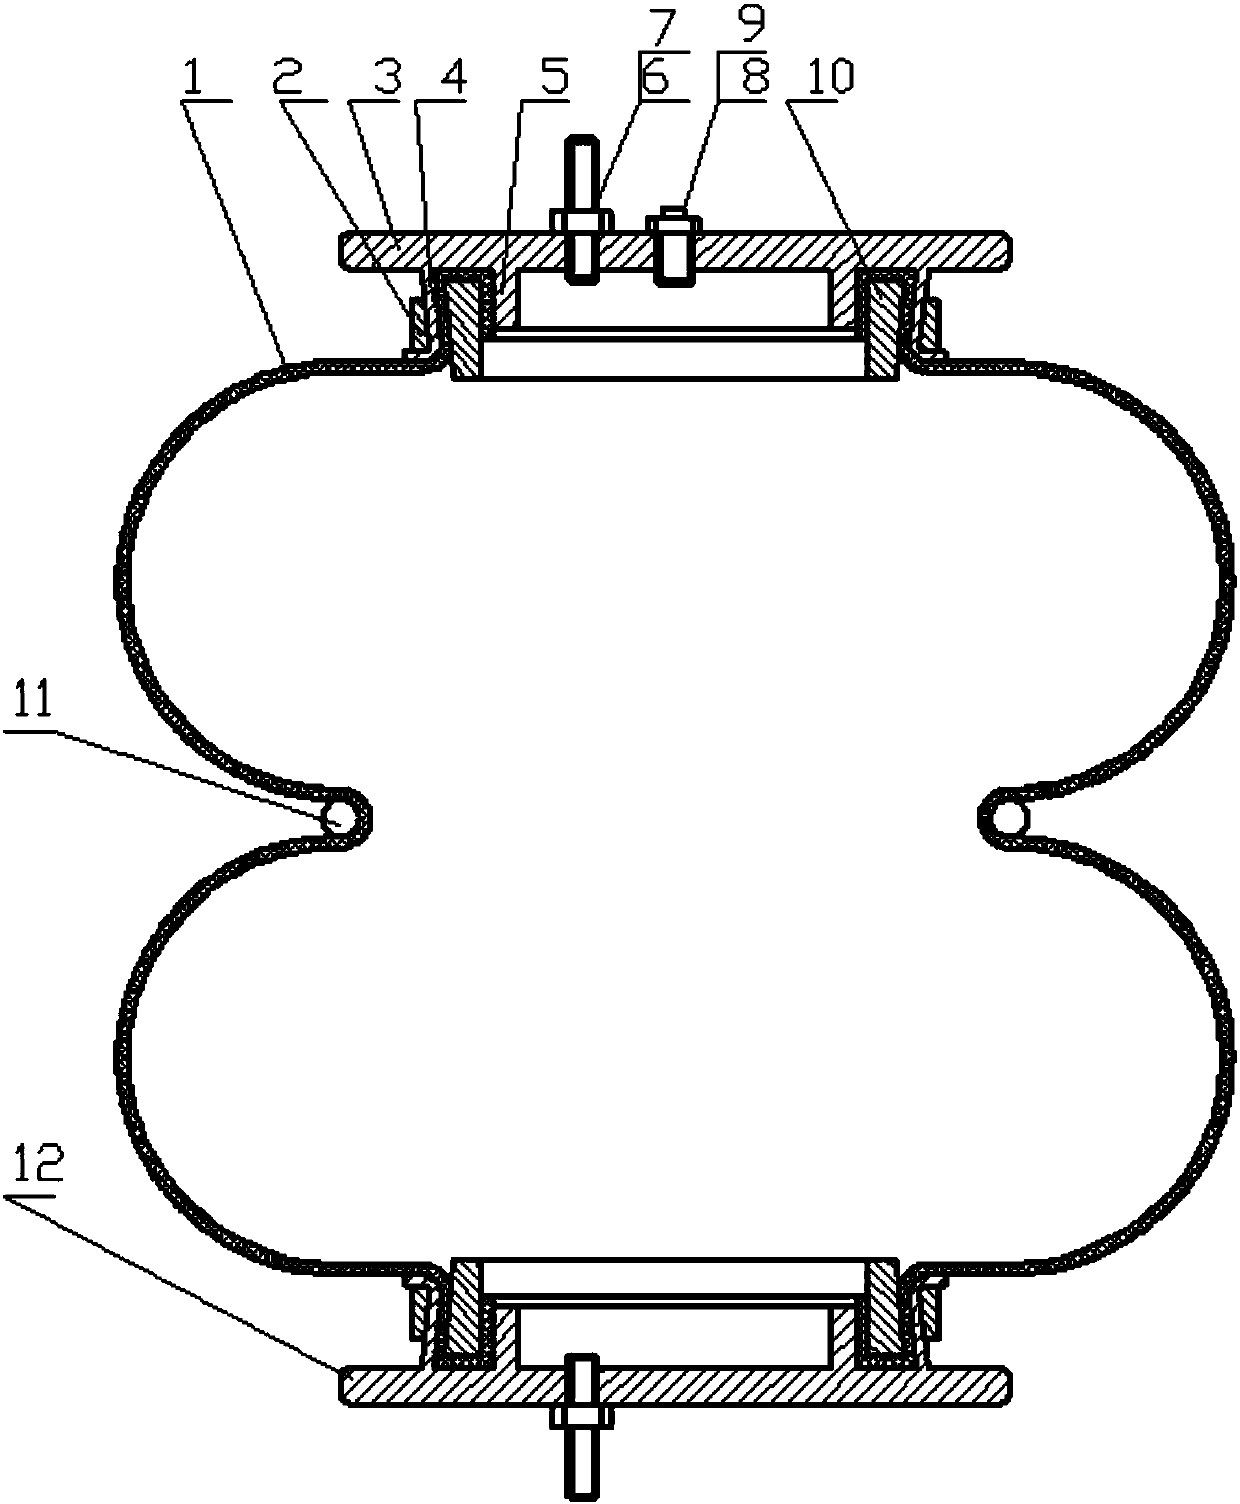 A sealing device for connecting an air spring air bag to a cover plate